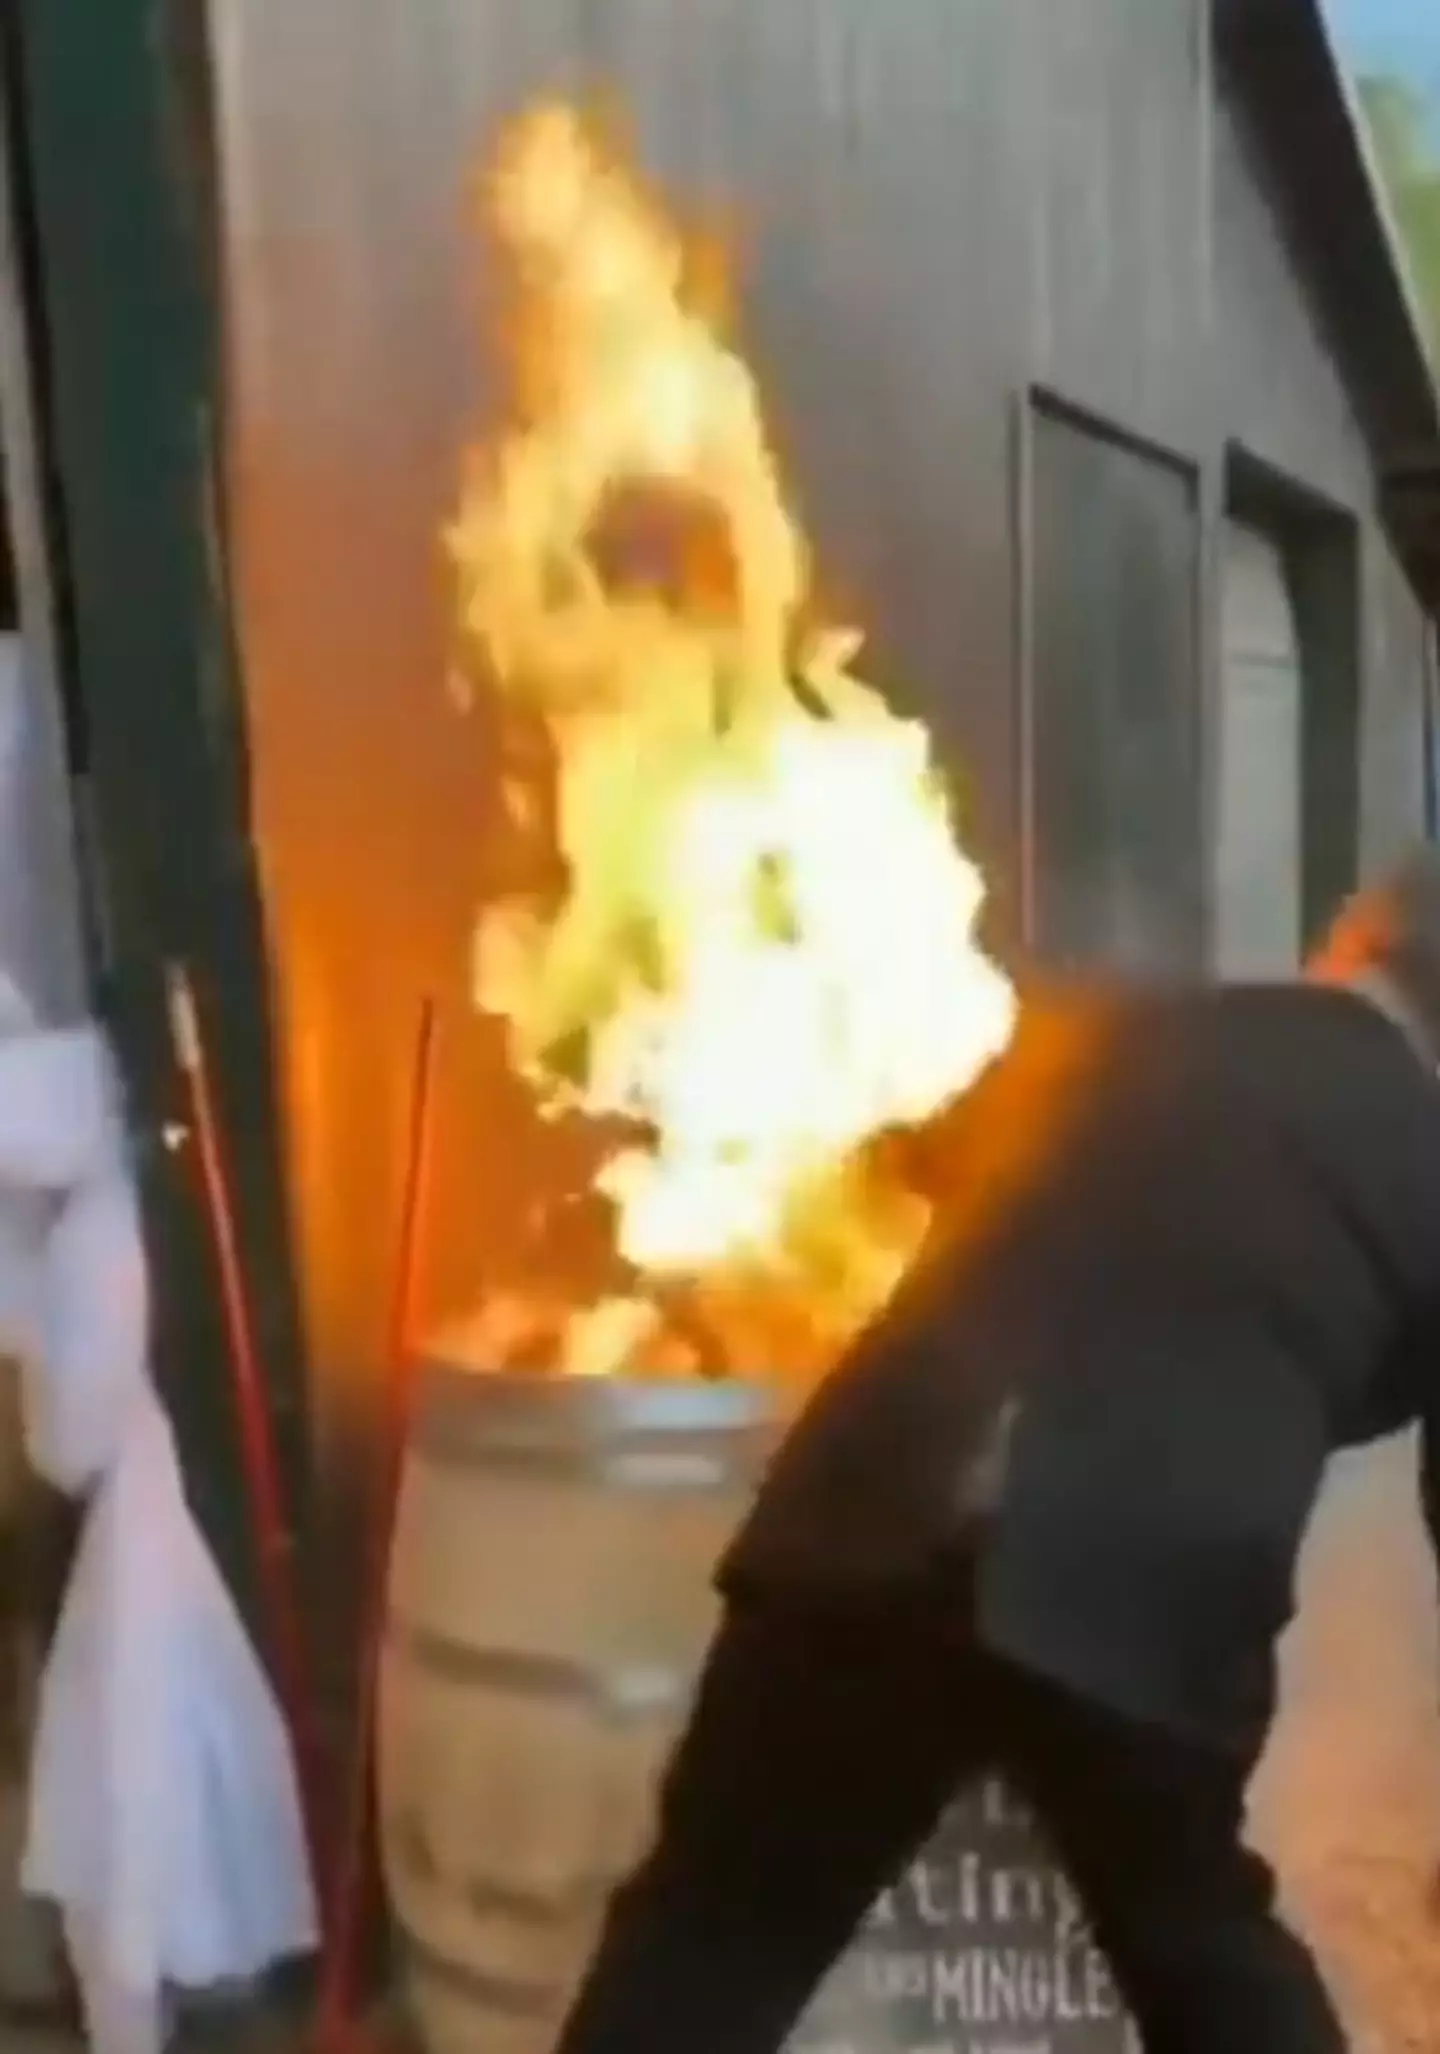 The gentleman tried to put the fire out with his arm.